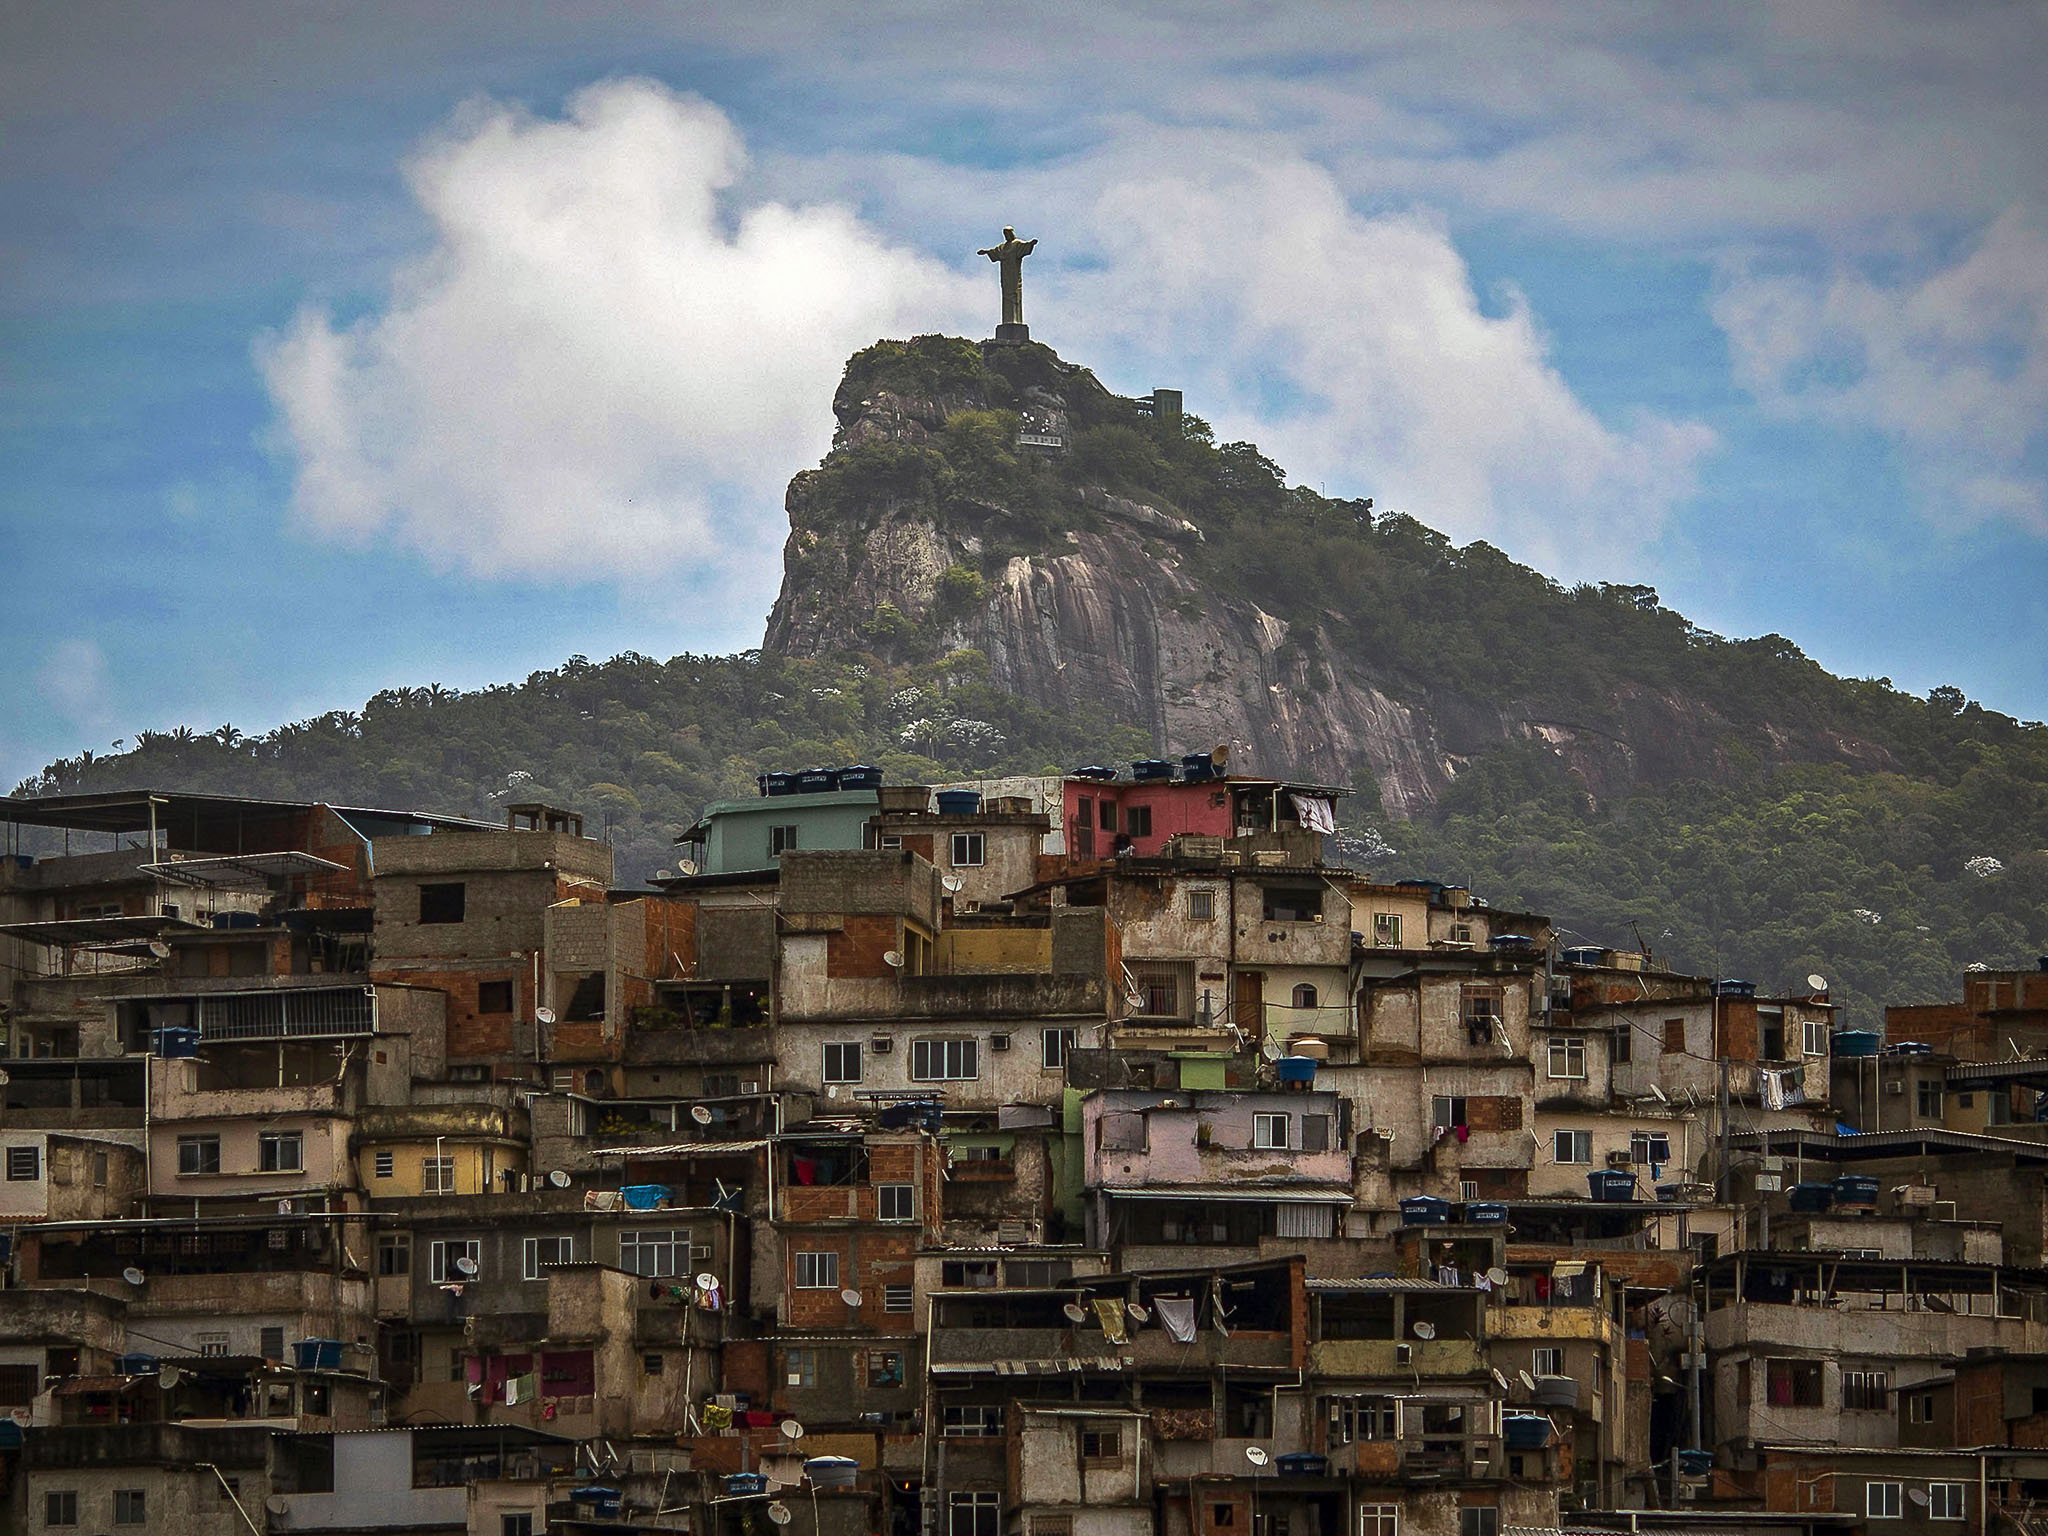 In Rio de Janeiro, 'complete vulnerability' as violence surges | The ...